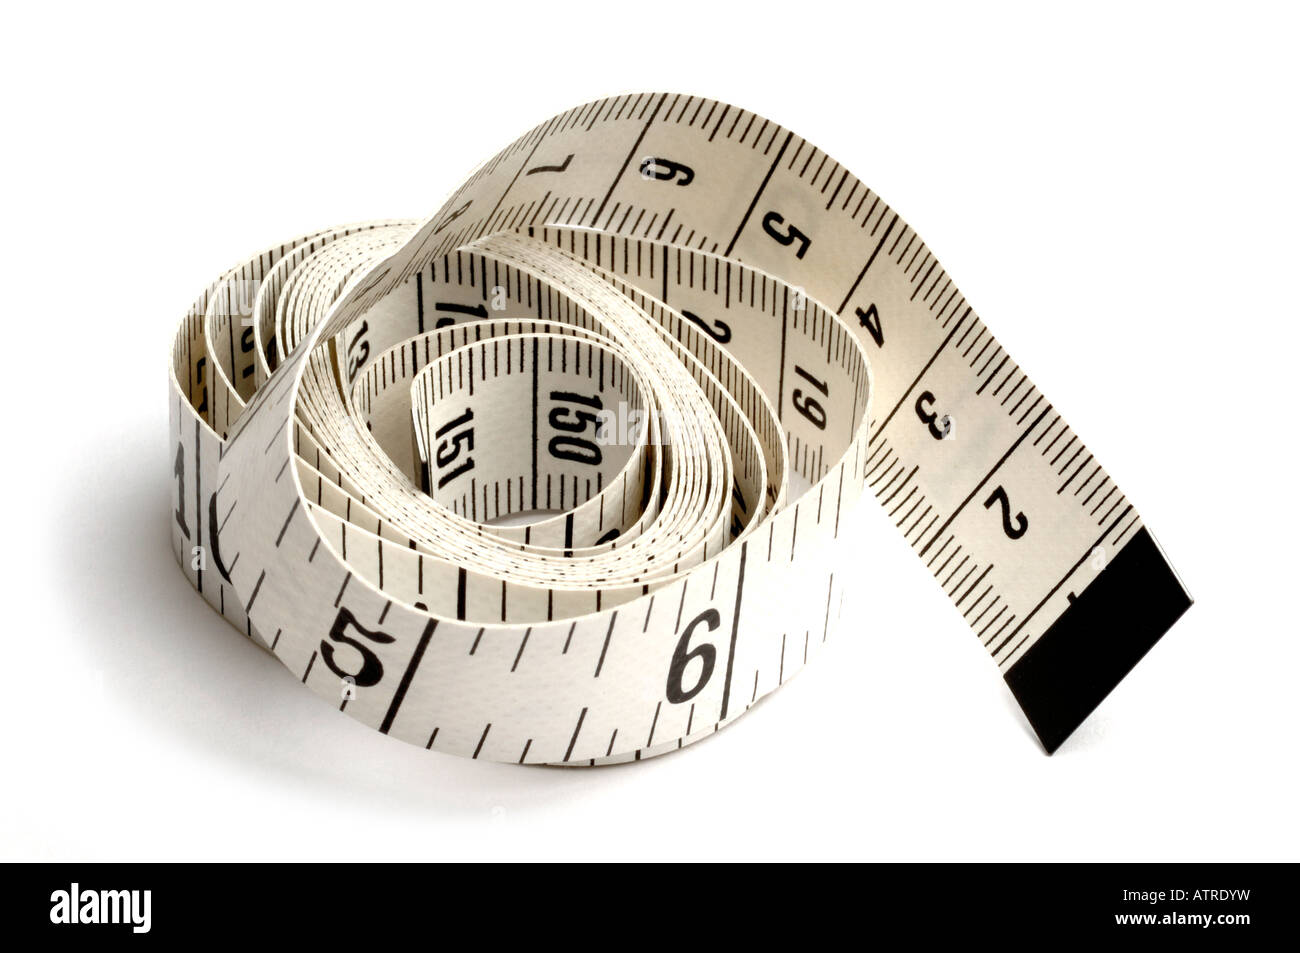 Imperial tailors tape measure, cut out or isolated against a white